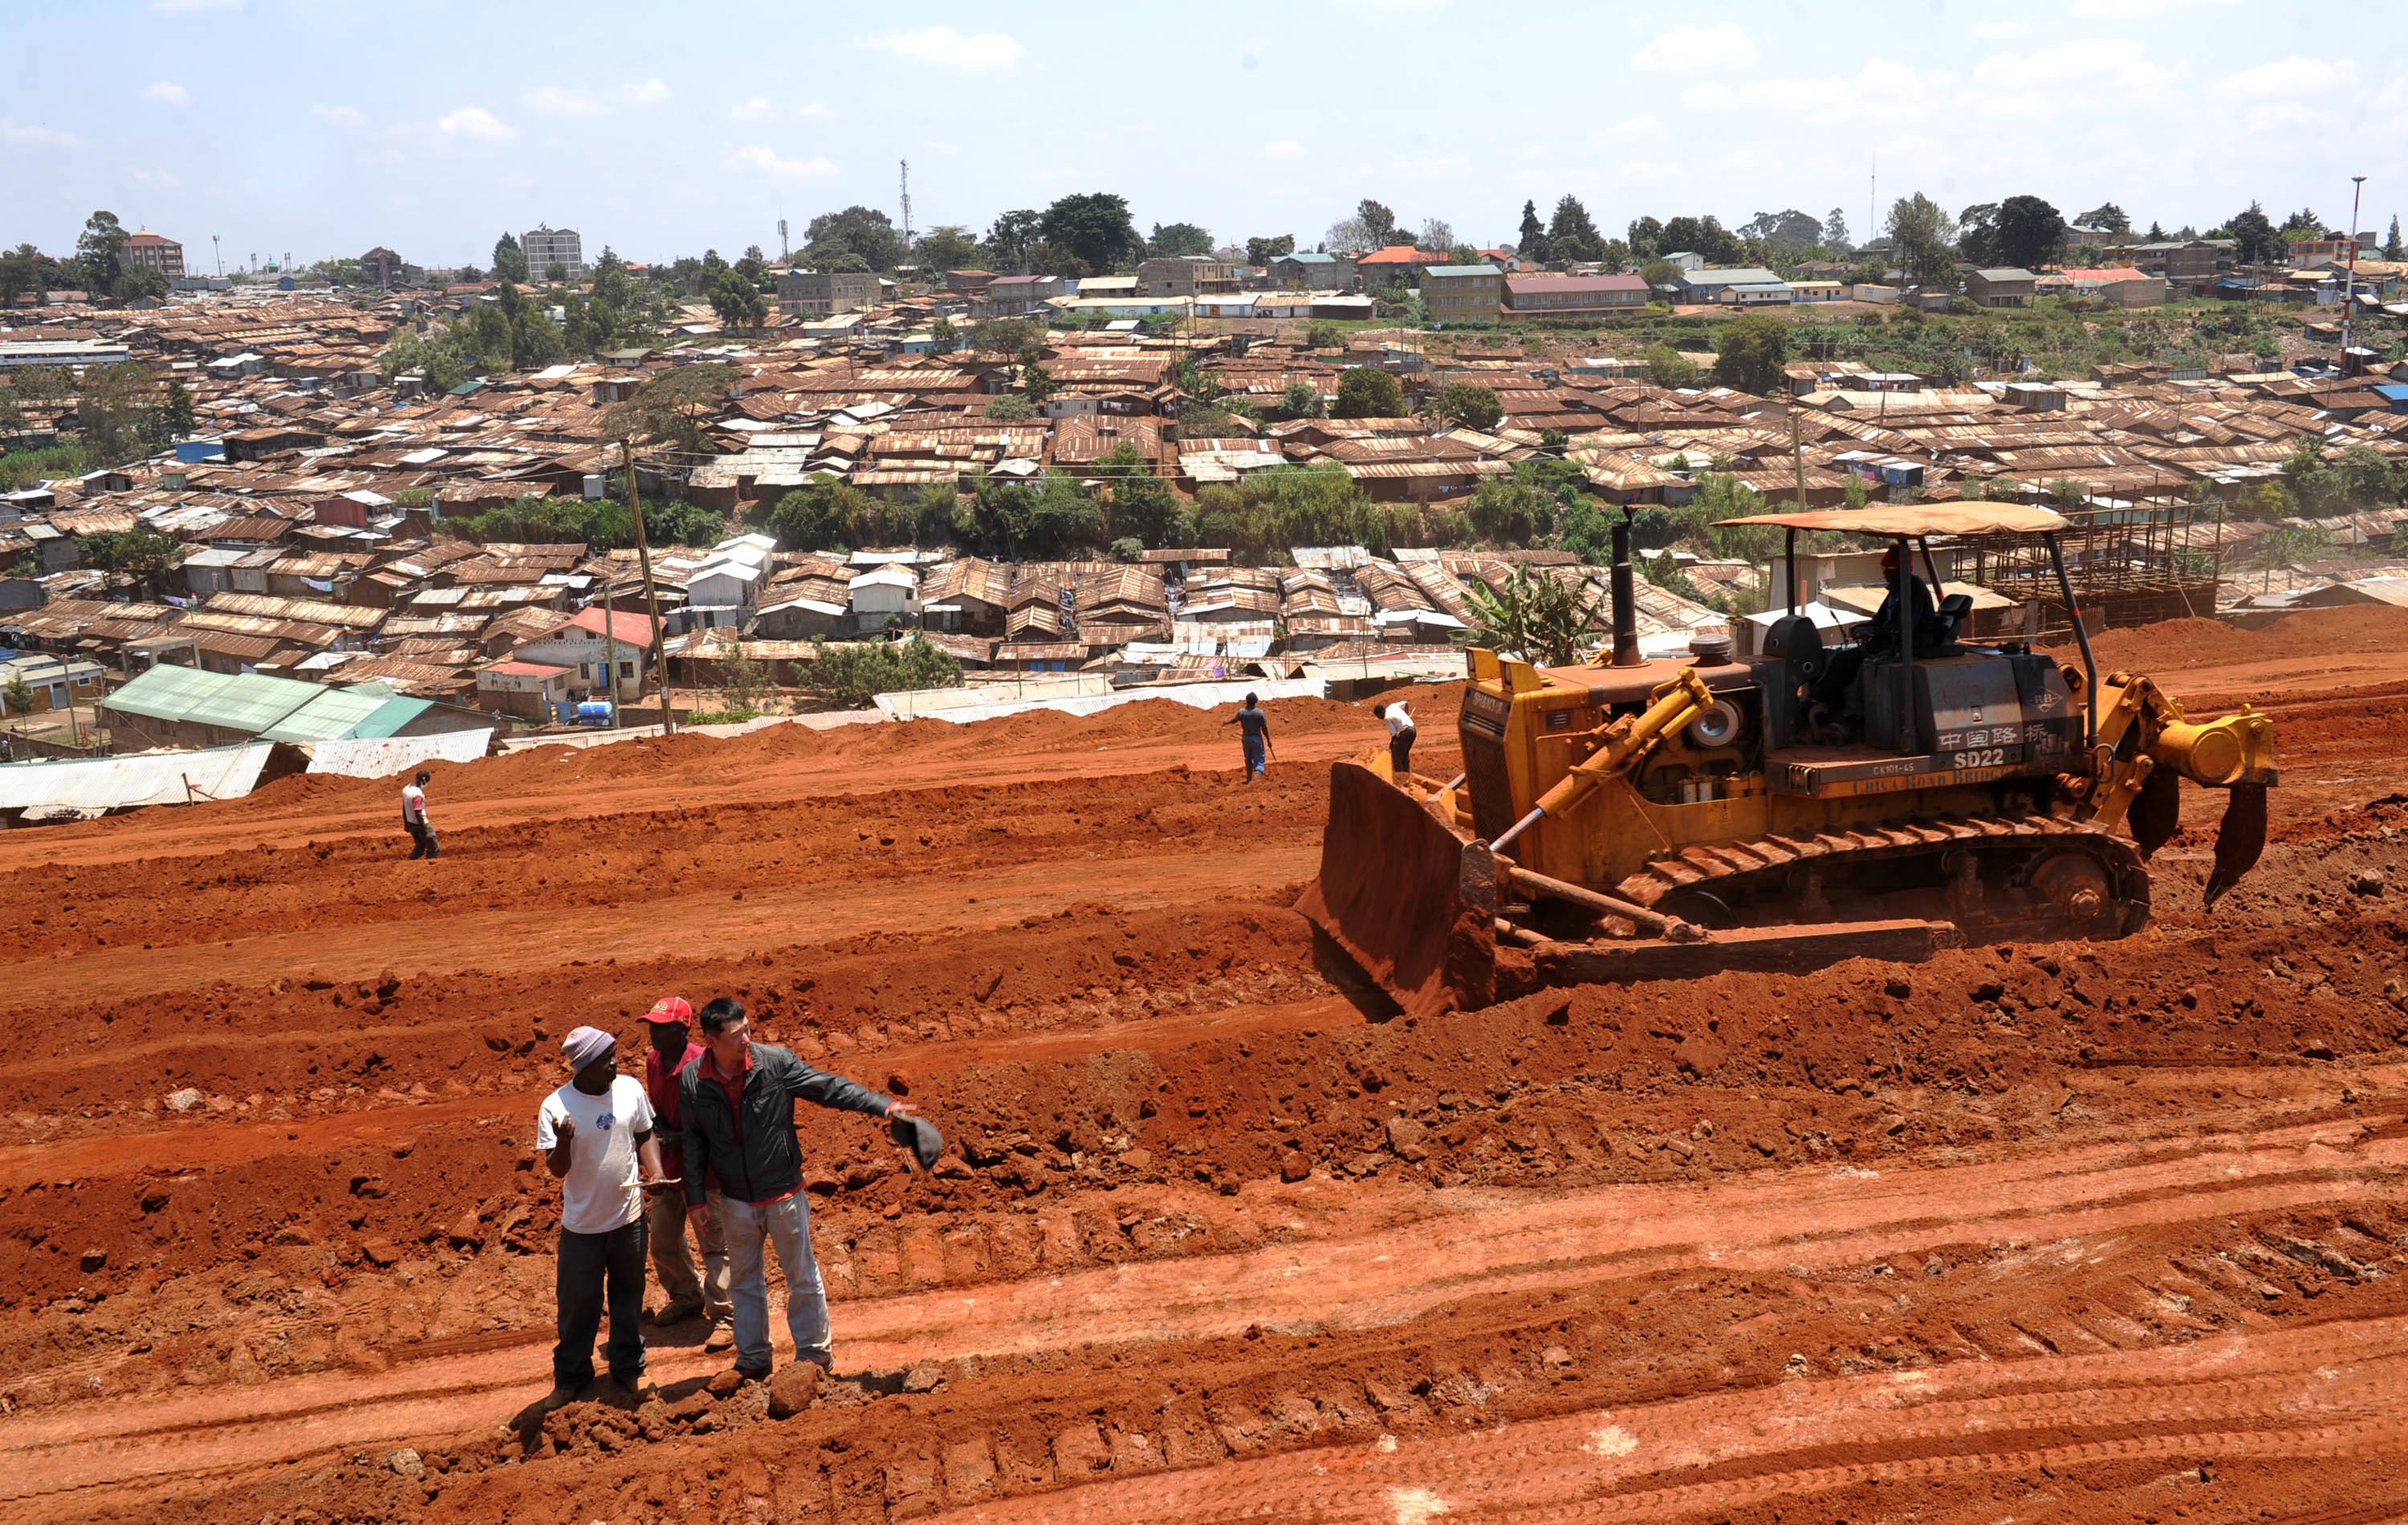 South-south cooperation is not valuable in itself: Chinese-funded road construction in Kenya.